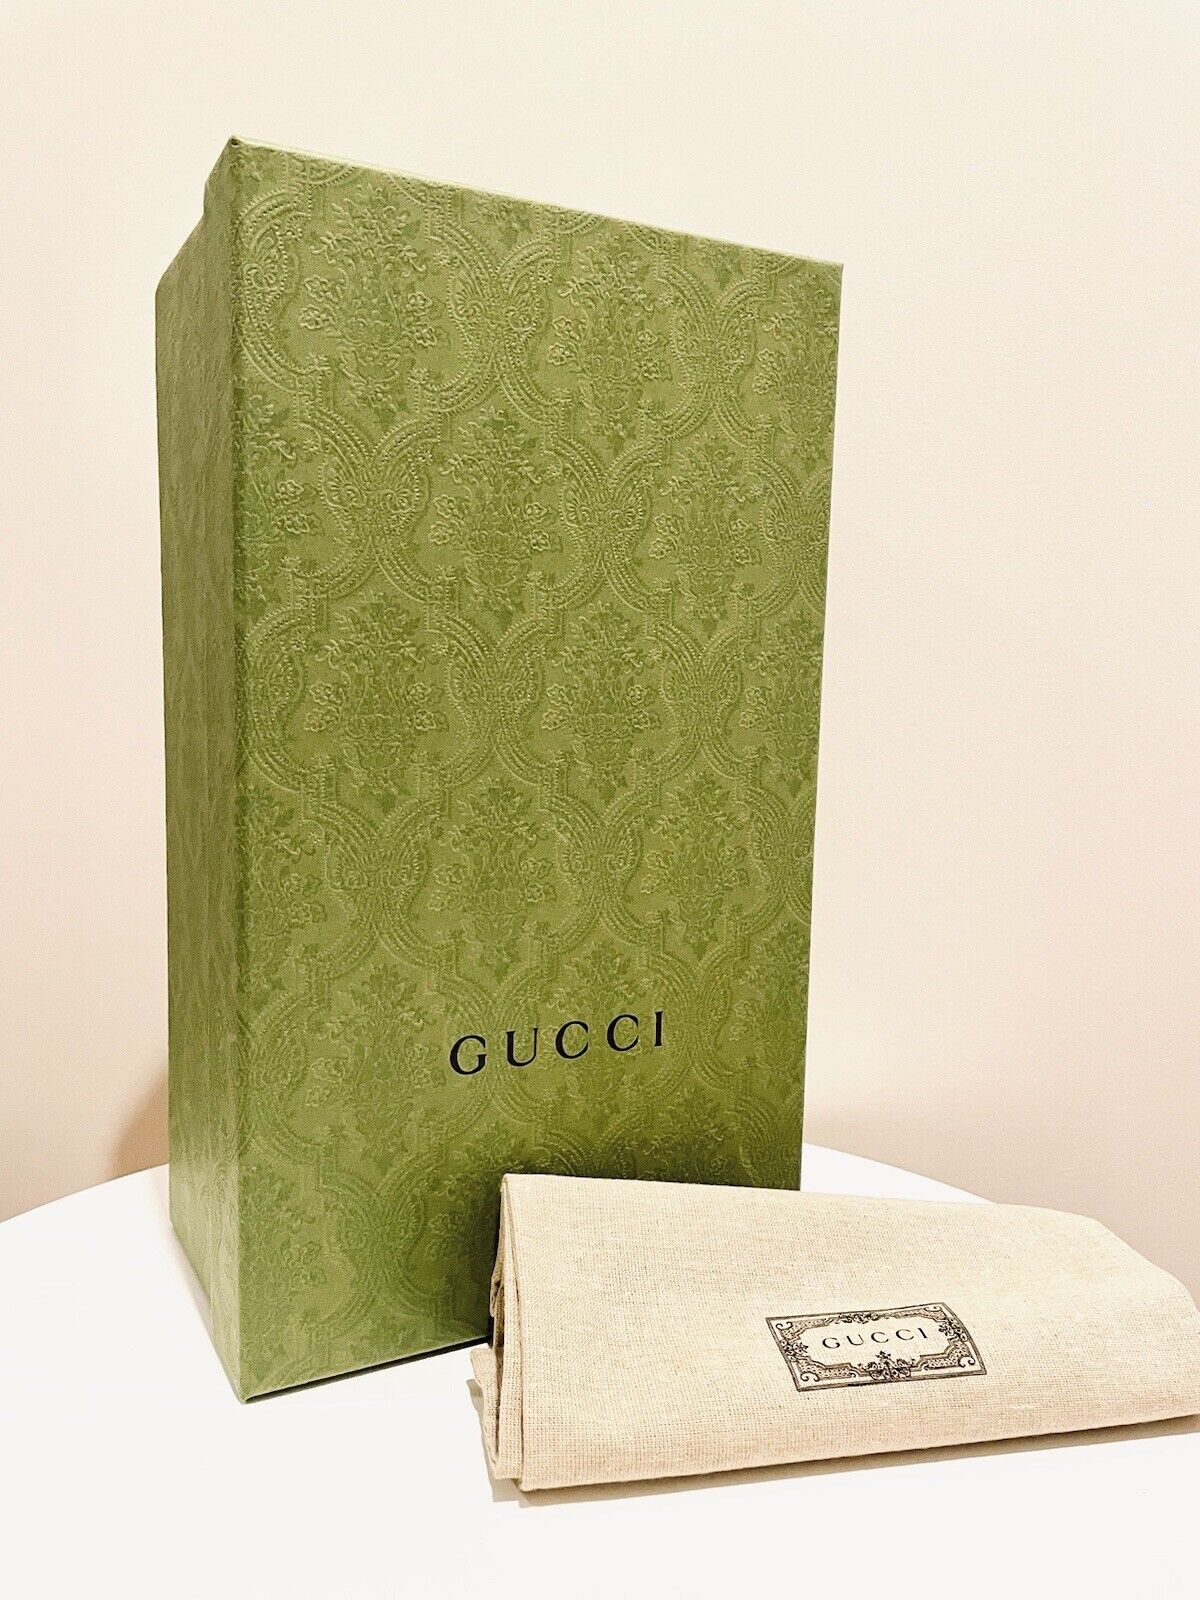 Gift Set! GUCCI Authentic Shopping Gift Box 14.5x8.5x5.25” Dust Bag tissue